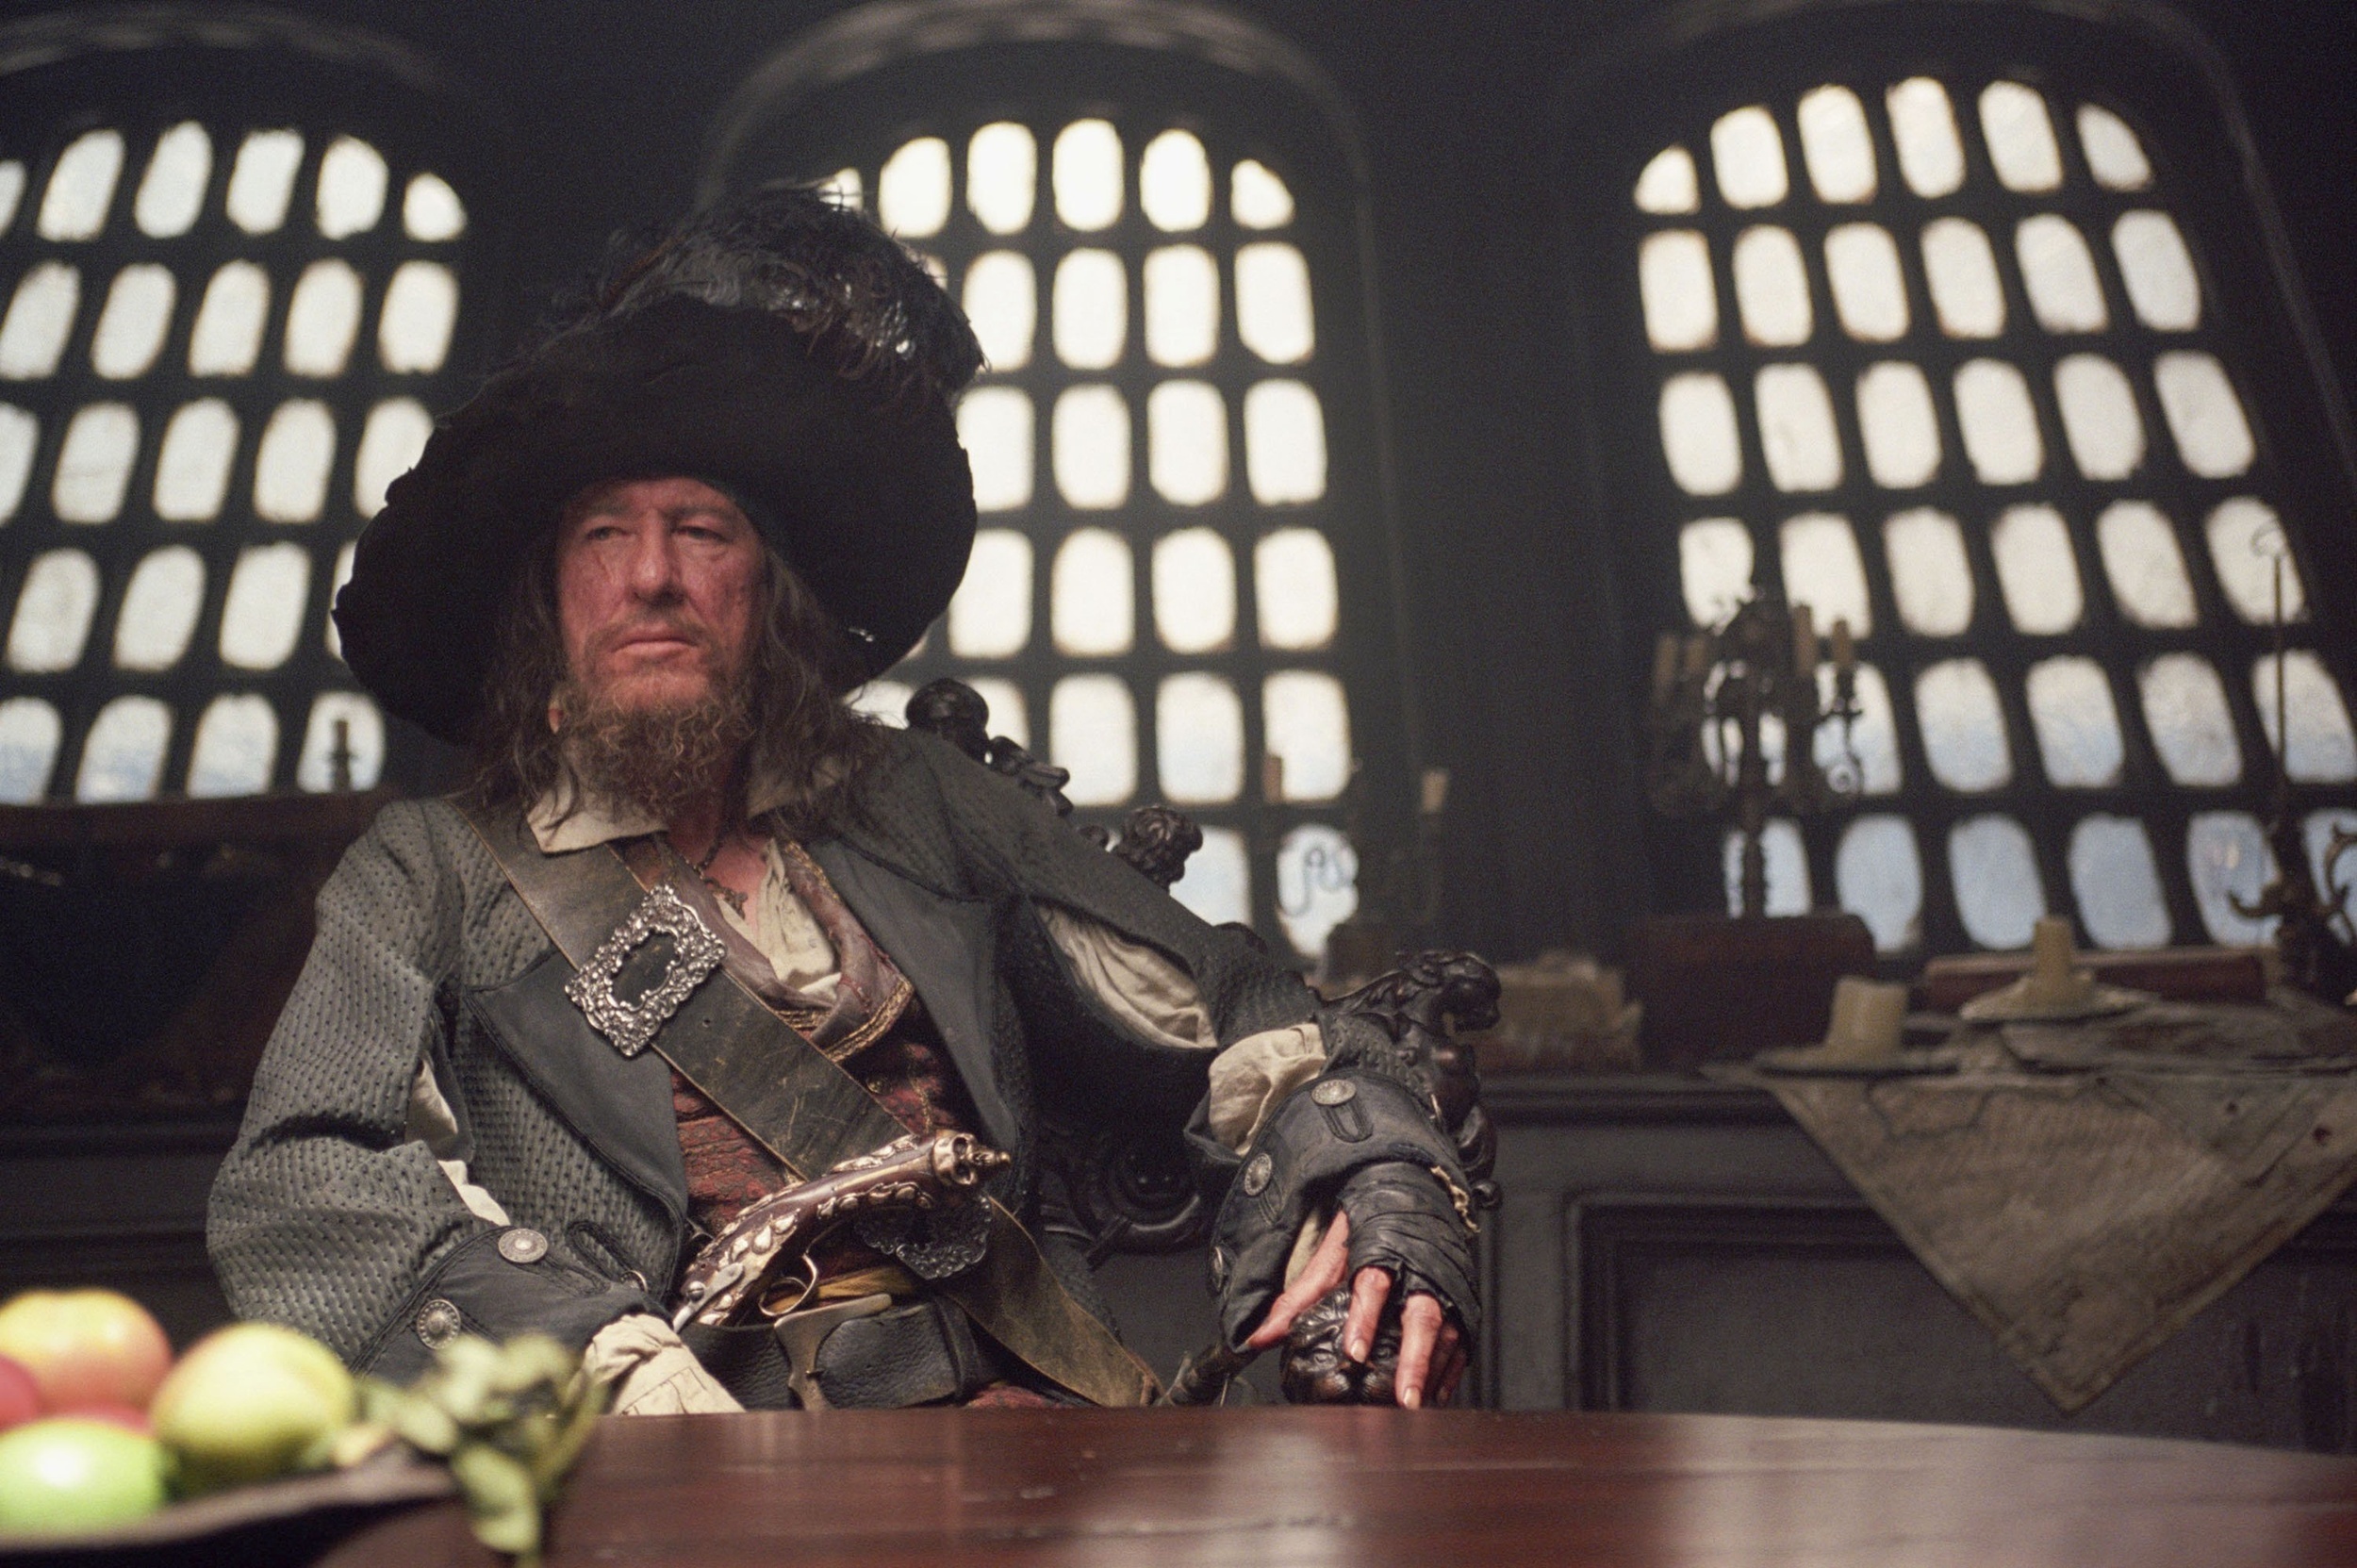 <p>Barbossa, the antagonist of the film, is played by Geoffrey Rush in the movie. He’s a fine actor, but he was not the first option. Robert De Niro had been offered the role, but he reportedly turned it down assuming the movie would flop, which had been the case for pirate movies for decades.</p><p>You may also like: <a href='https://www.yardbarker.com/entertainment/articles/anti_hero_the_ultimate_taylor_swift_playlist_022324/s1__30786248'>Anti-Hero: The ultimate Taylor Swift playlist</a></p>